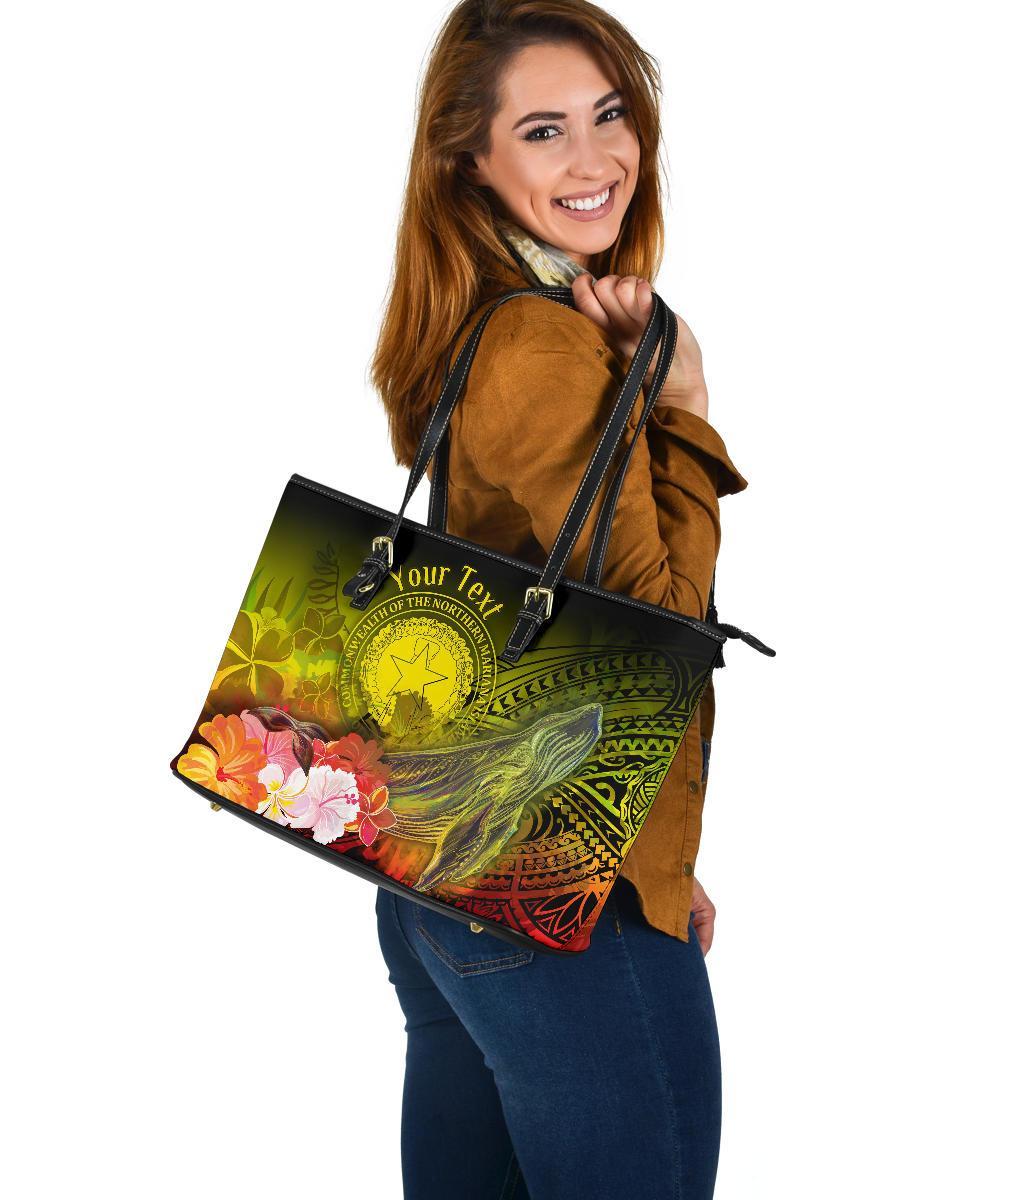 CNMI Custom Personalised Leather Tote Bag - Humpback Whale with Tropical Flowers (Yellow) Yellow - Polynesian Pride